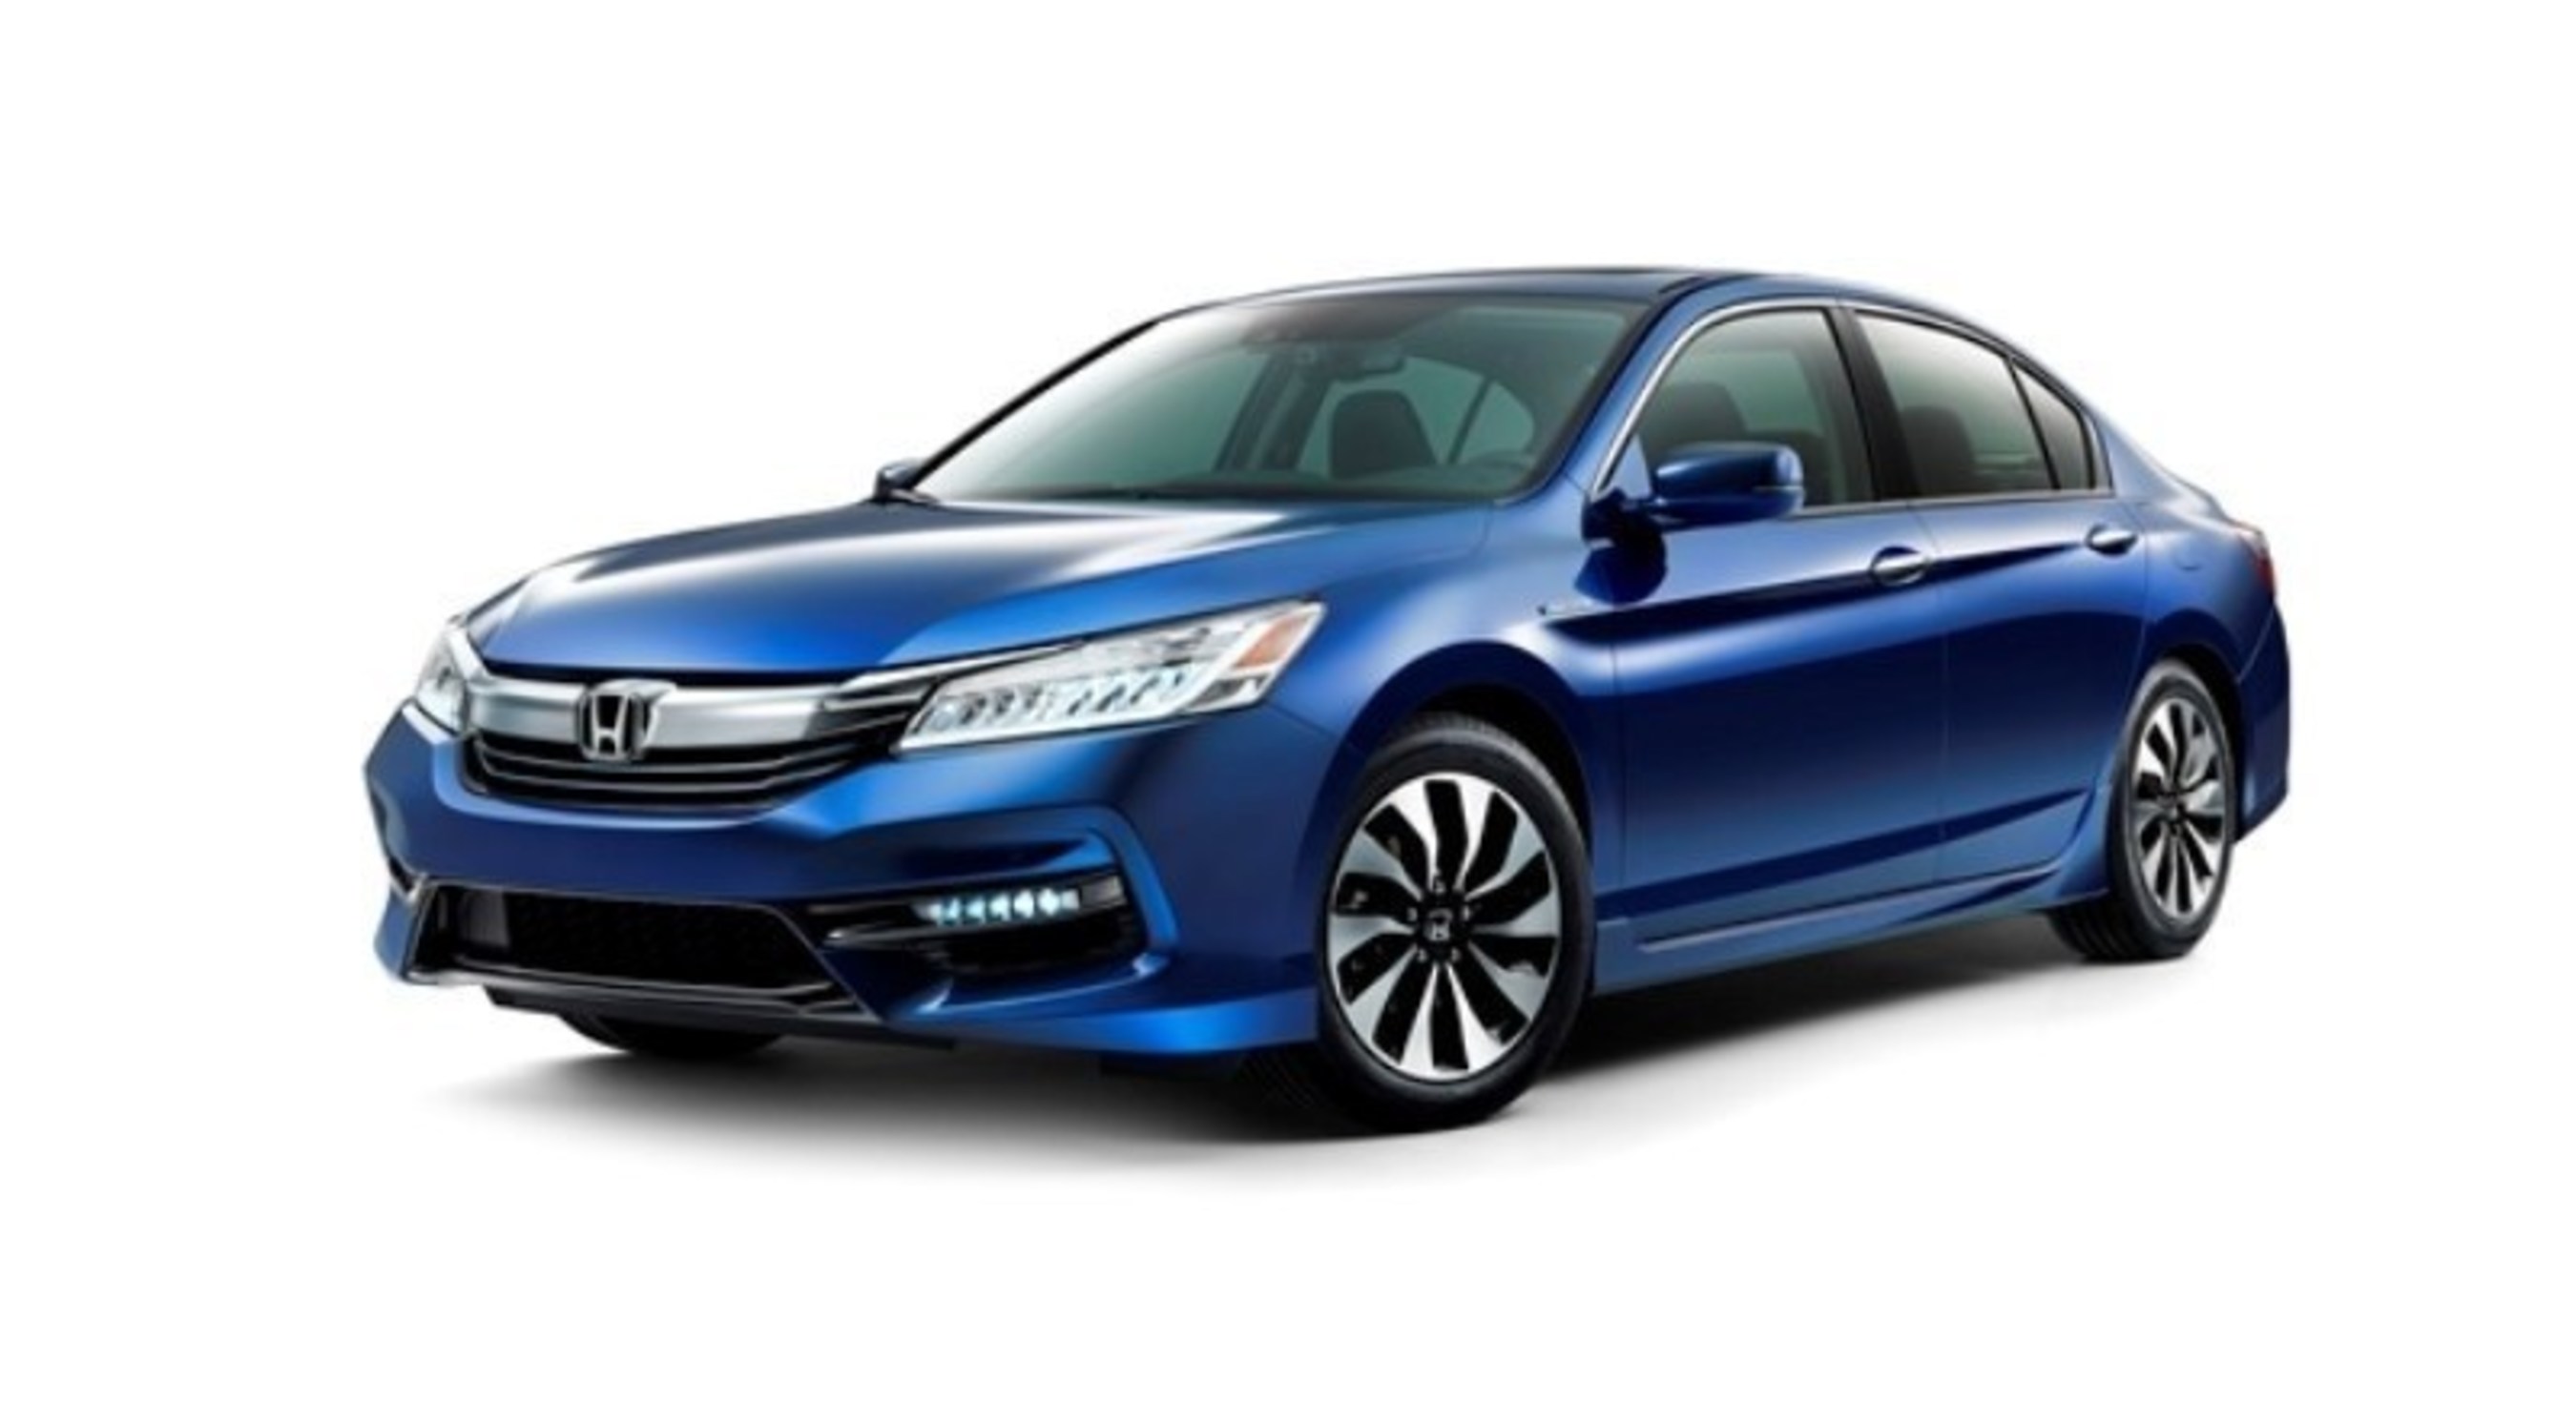 The Best Gets Better:  More Powerful, Fuel Efficient and Technologically Advanced 2017 Accord Hybrid Launching this Spring